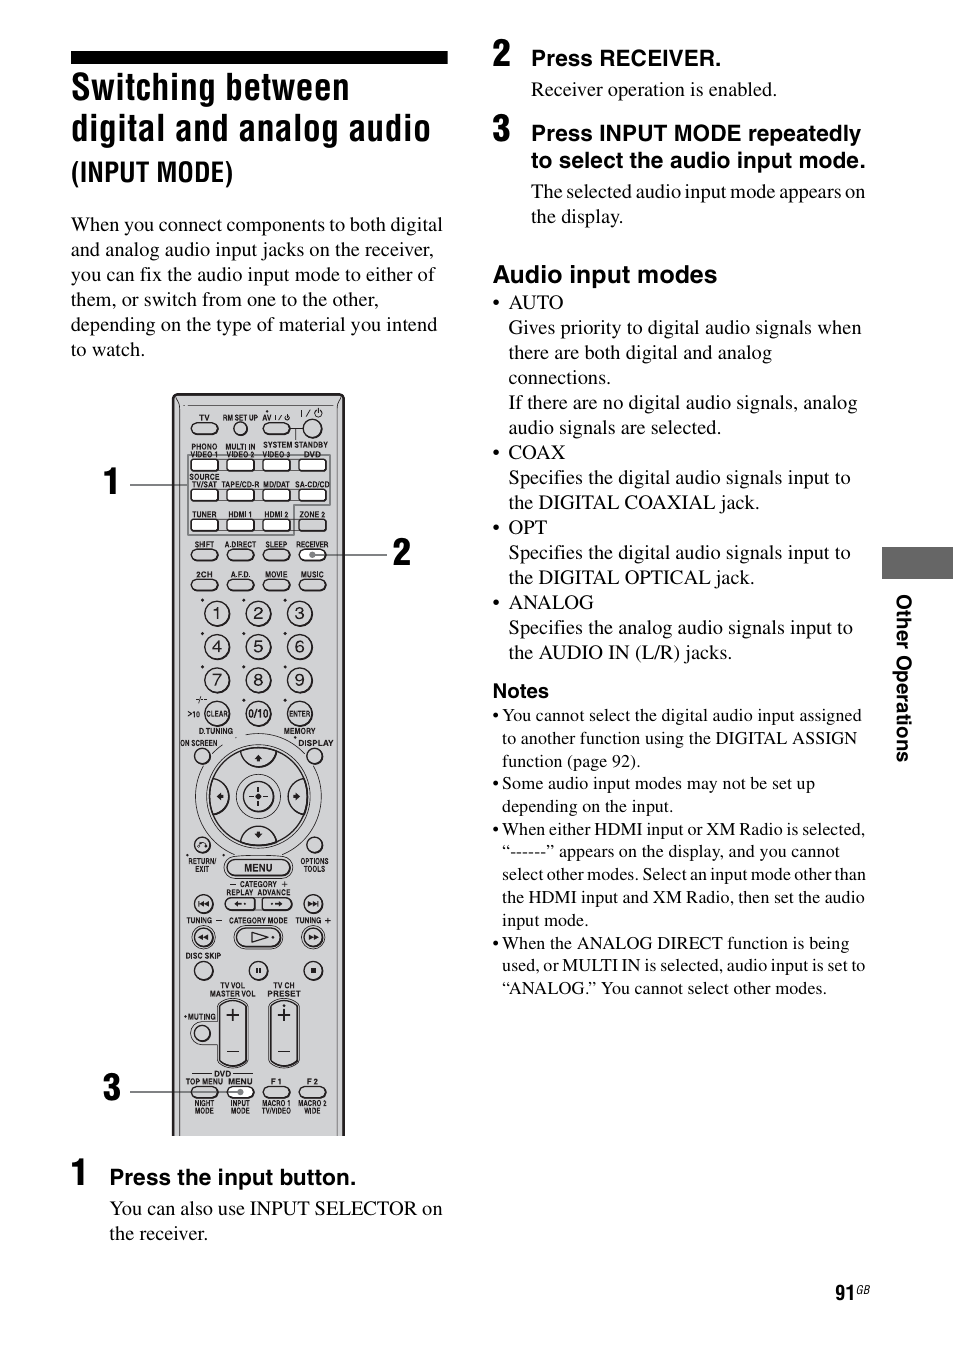 Switching between digital and analog audio, Input mode), E 91 | E 91) | Sony STR-DG1000 User Manual | Page 91 / 123